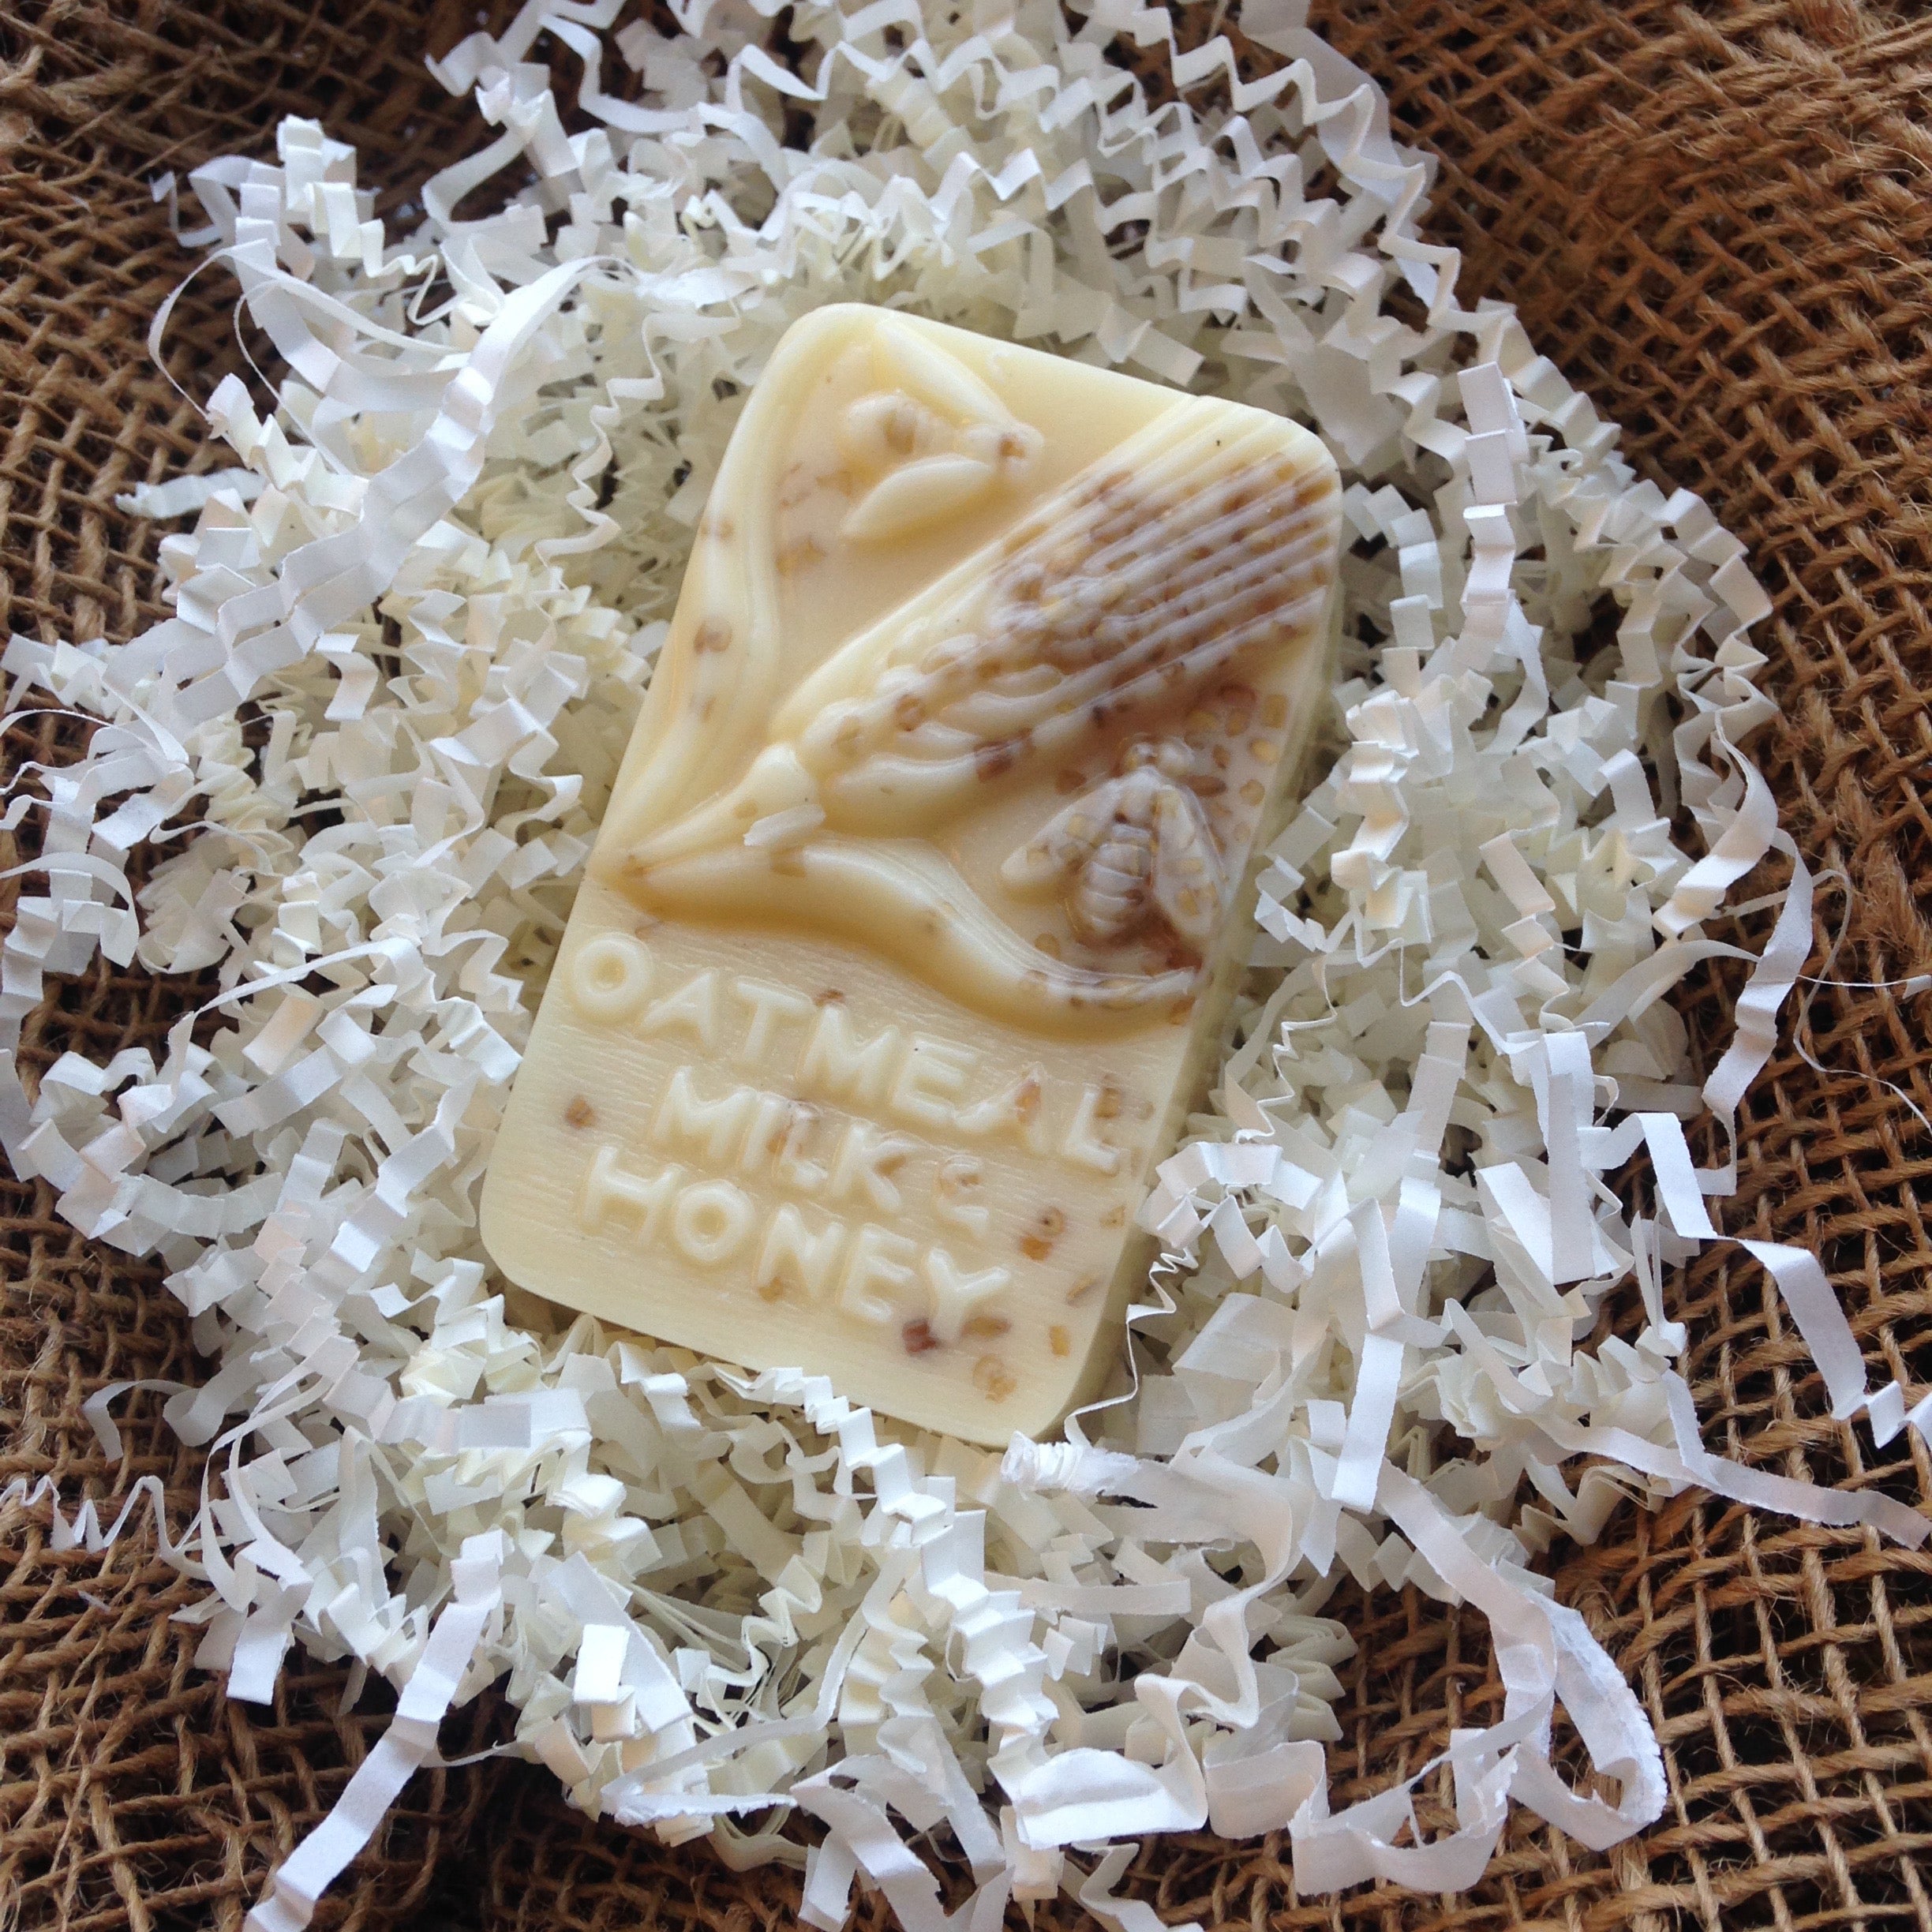 Pure Honey Soap with Organic Shea Butter